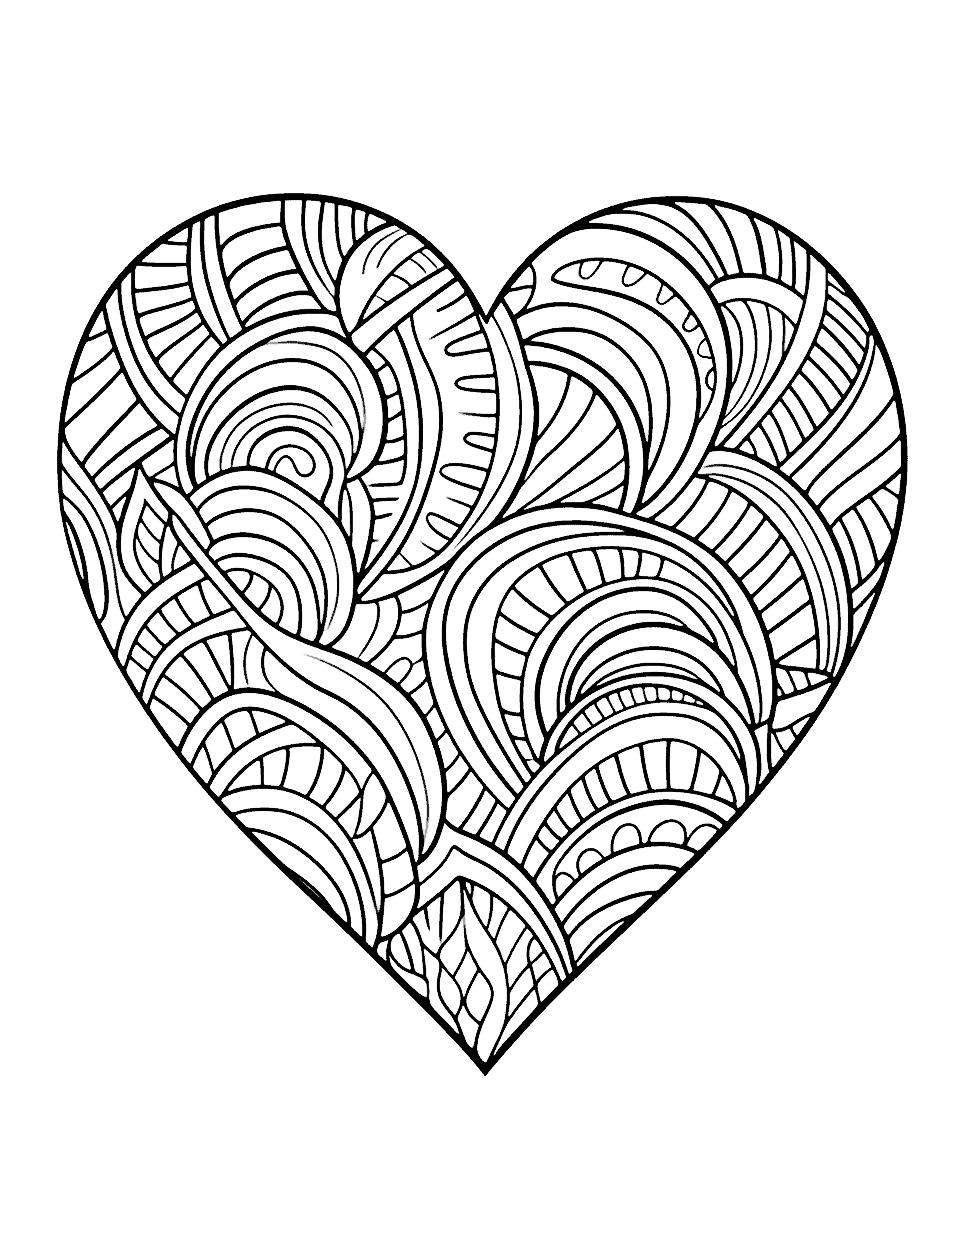 Zentangle Heart Art Coloring Page - A heart-shaped zentangle pattern that kids can color in a variety of hues.